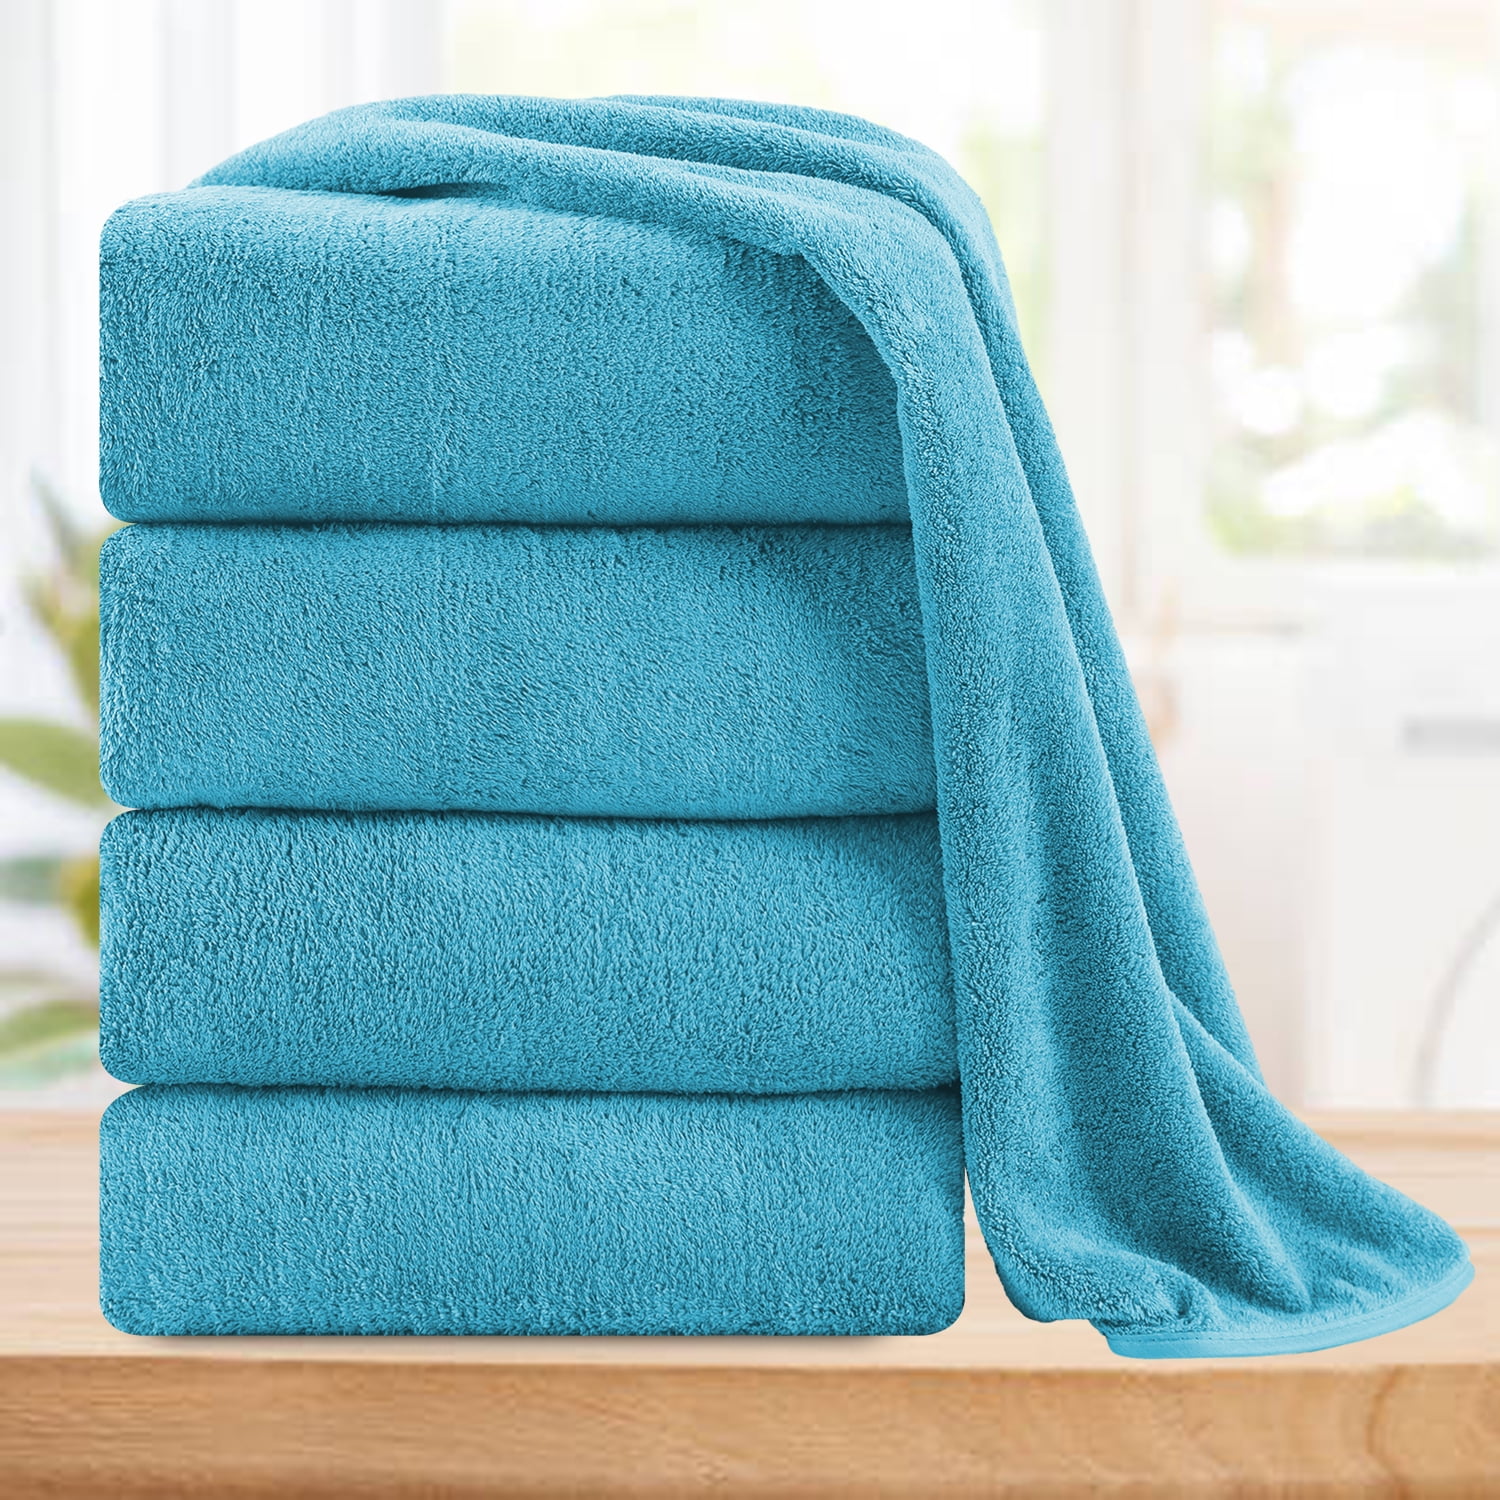 MAGGEA 4 Piece Oversized Bath Sheet Towels (35 x 70 in,Navy Blue) 700 GSM Ultra Soft Bath Towel Set Thick Large Cozy Plush Highl